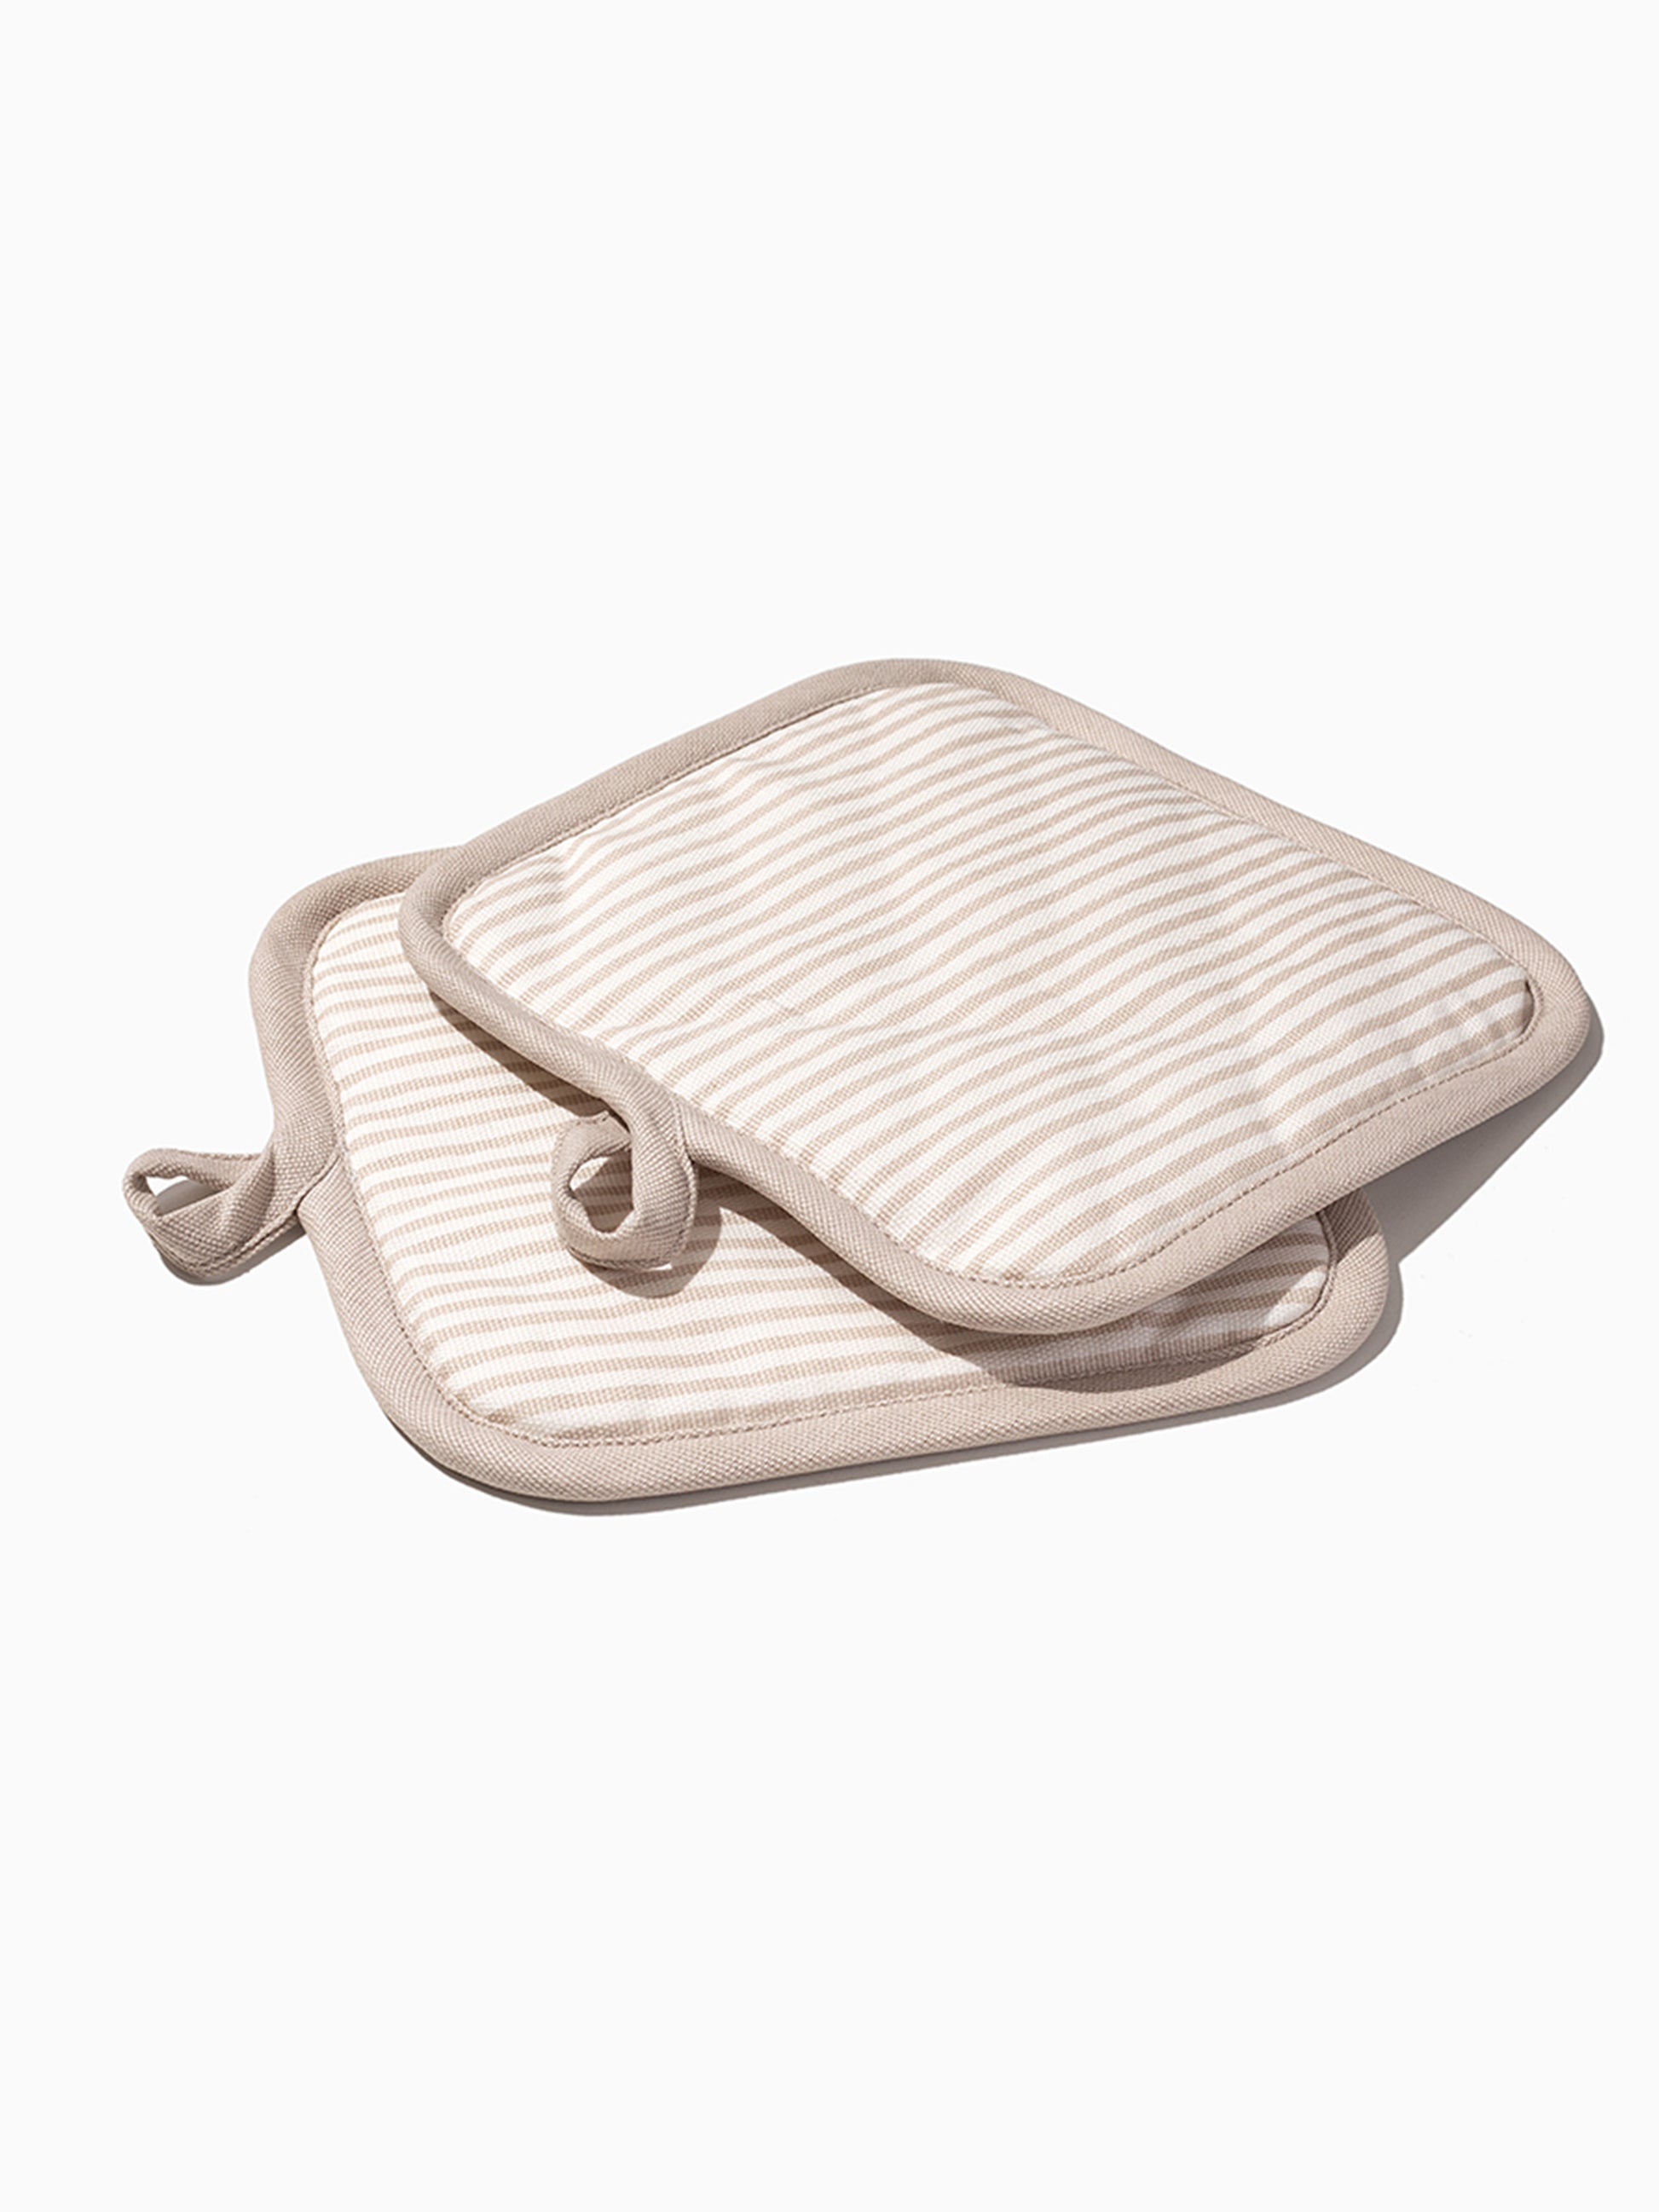 Tan Striped Pot Holder (Set of 2) | Product Detail Image | Uncommon Lifestyle